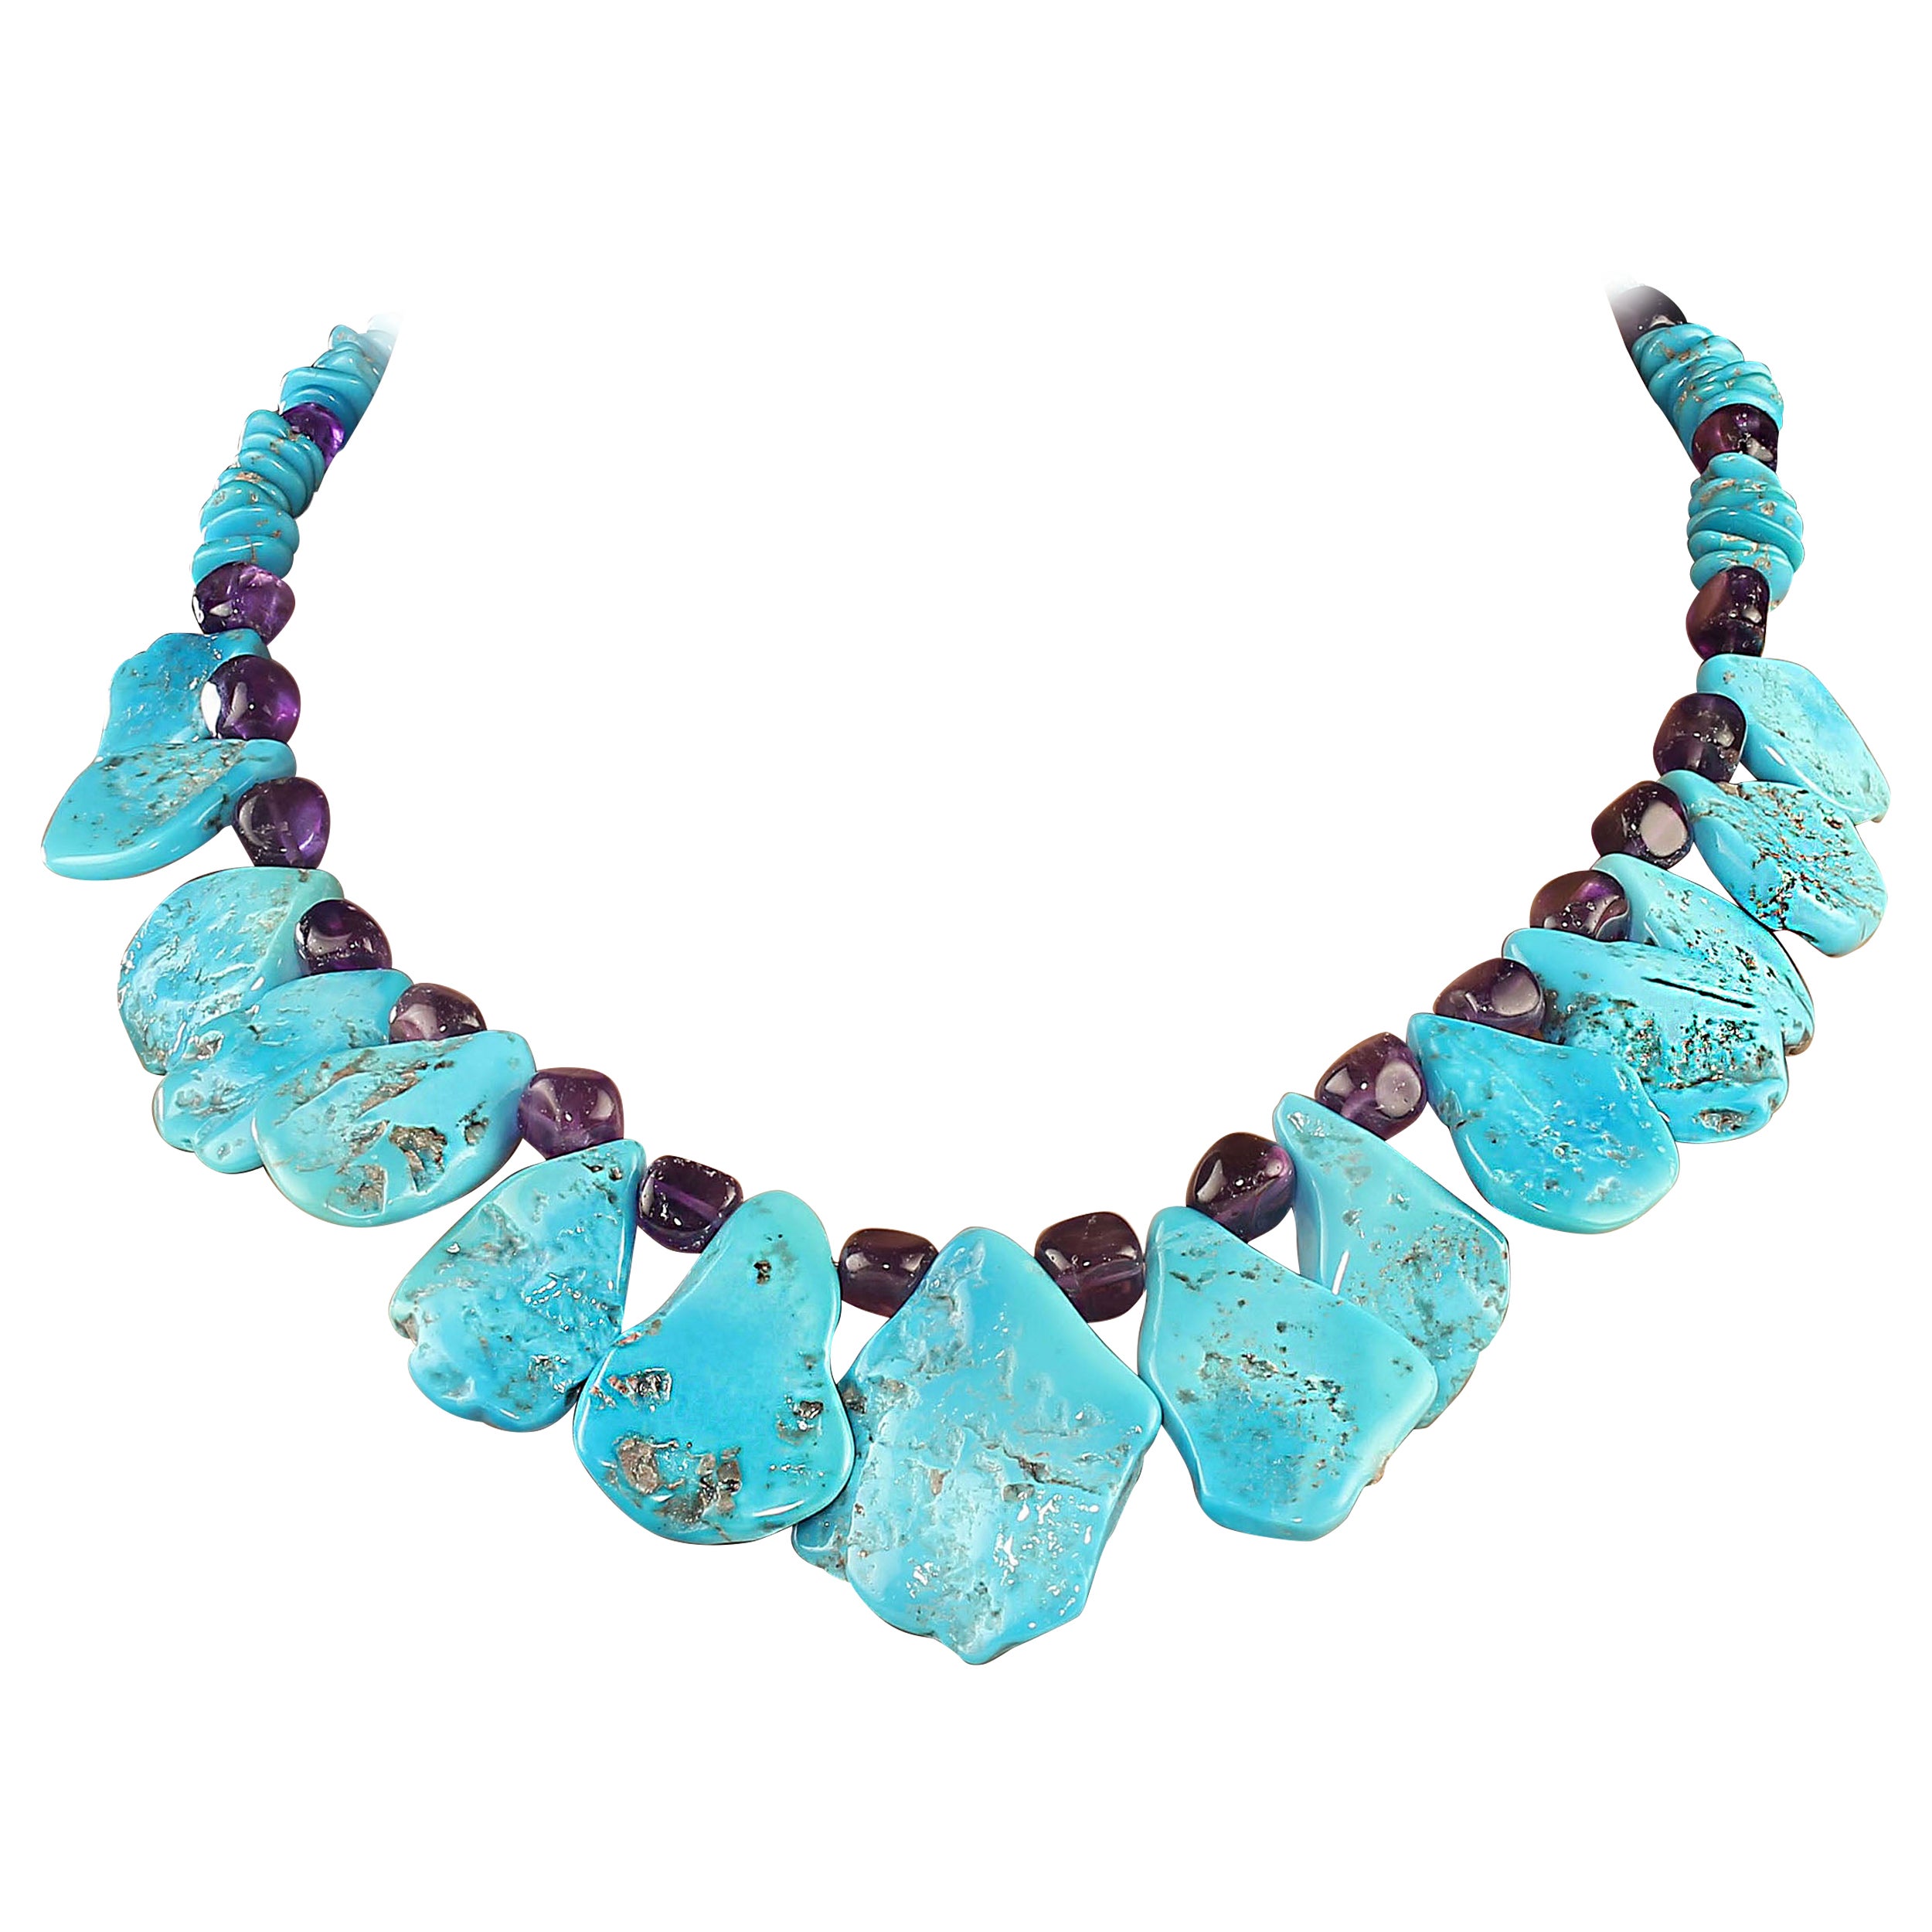 18-inch unique Sleeping Beauty turquoise tablets accented with amethyst necklace.  This one-of-a-kind necklace features graduated flat Sleeping Beauty turquoise tablets, 38x29- 21x17mm accented with nuggets of glowing translucent 8mm amethyst.  The